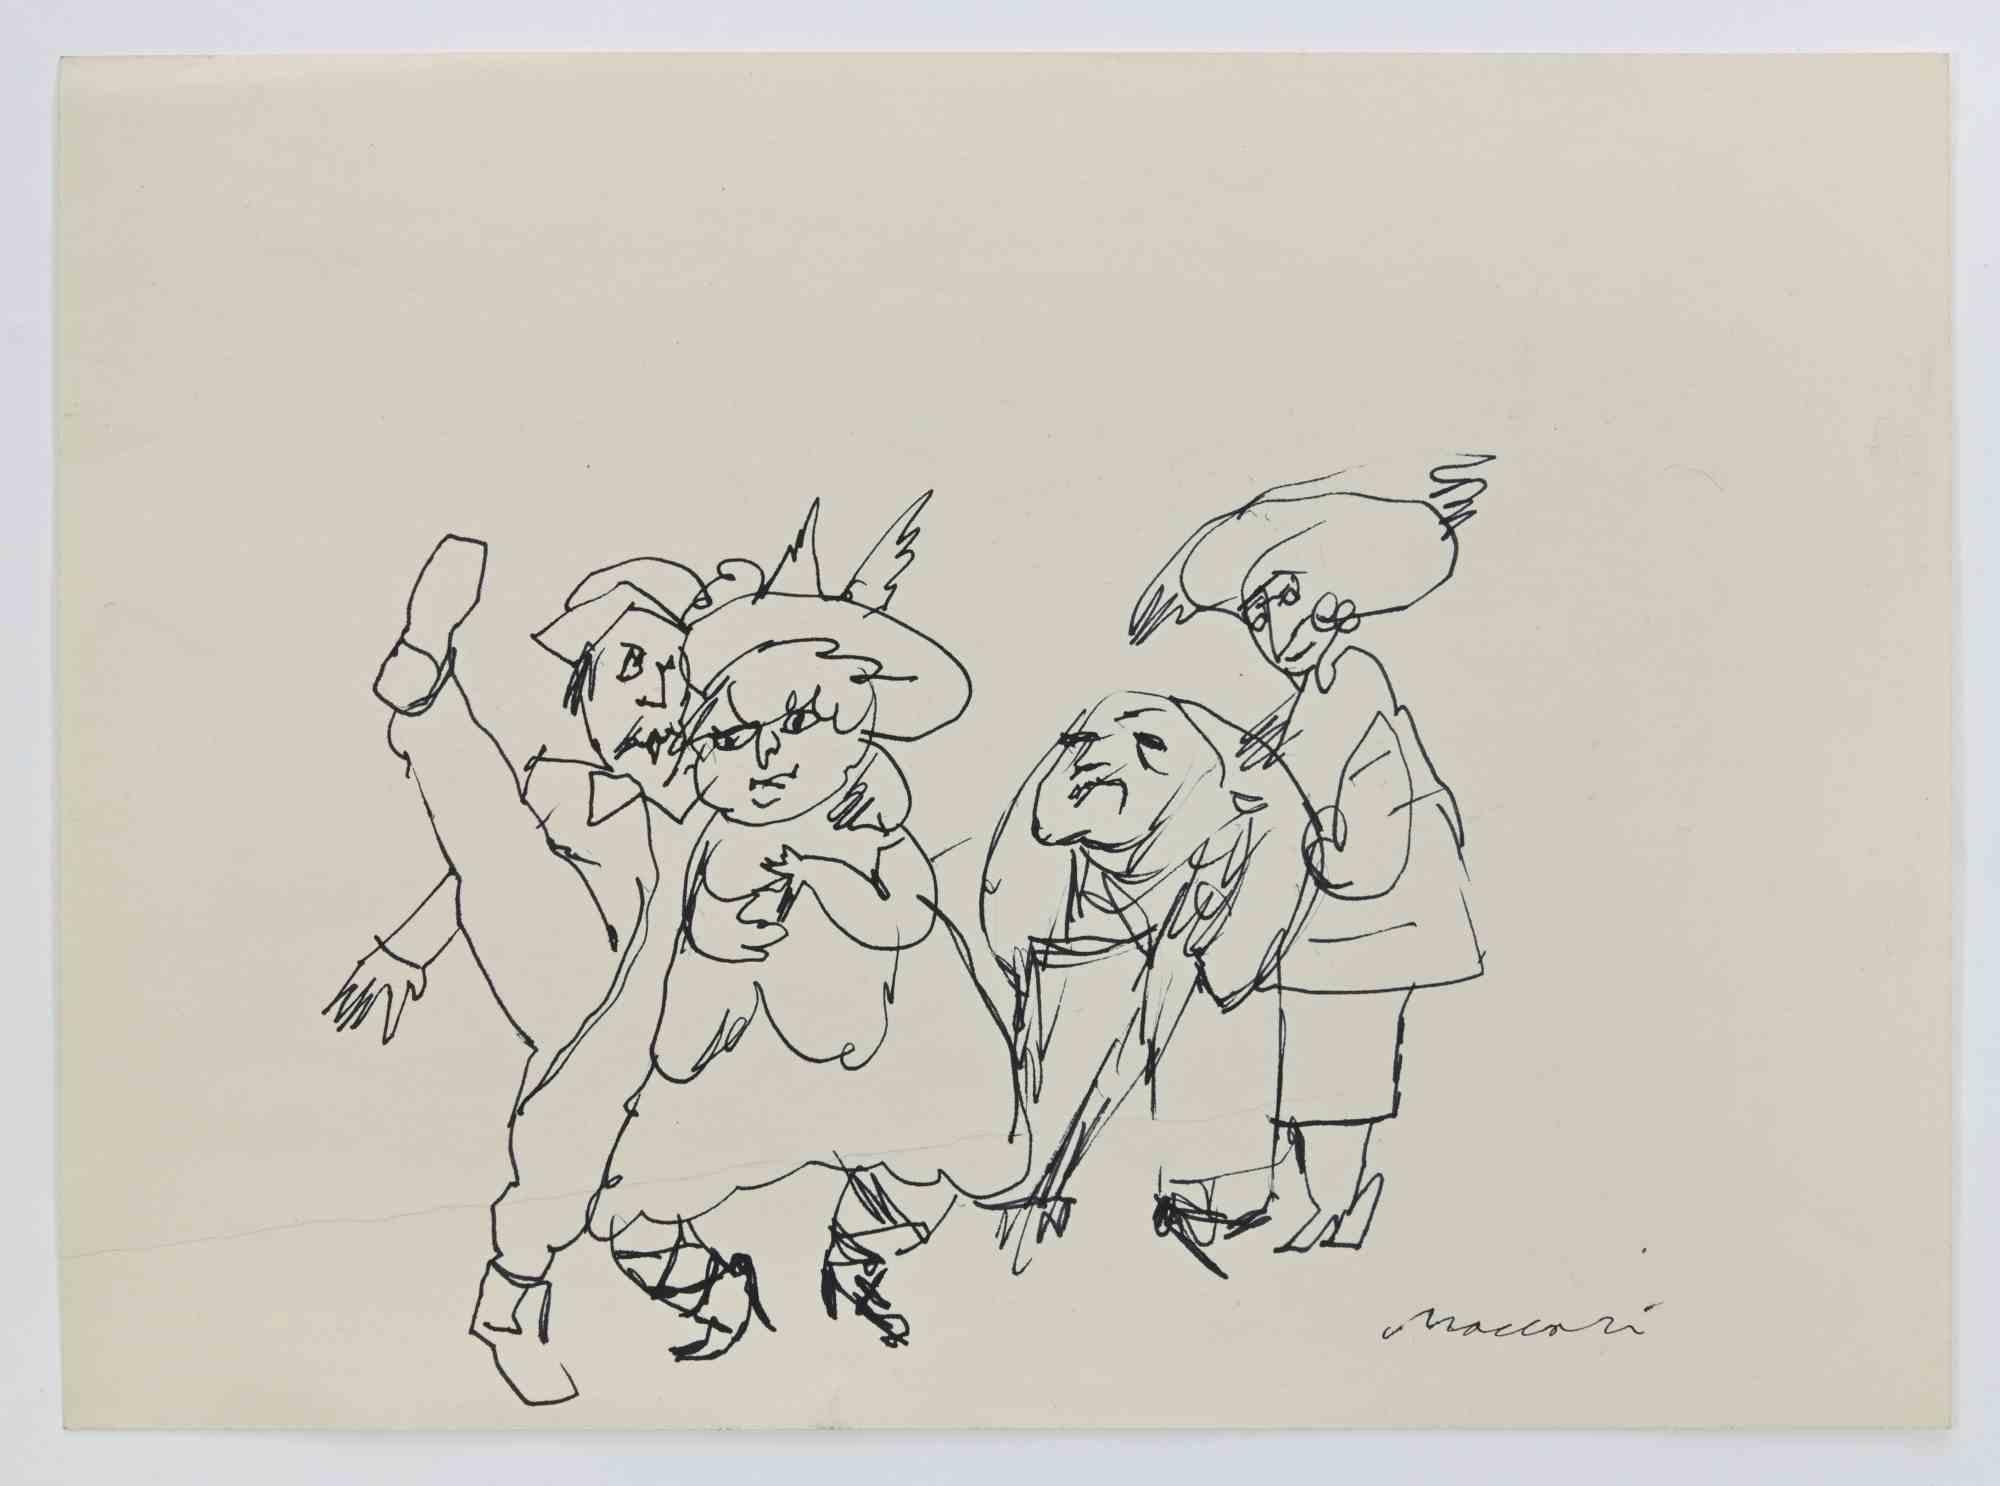 The Jolly Couples is a China Ink Drawing realized by Mino Maccari  (1924-1989) in the 1960s.

Hand-signed on the lower.

Good condition.

Mino Maccari (Siena, 1924-Rome, June 16, 1989) was an Italian writer, painter, engraver and journalist, winner